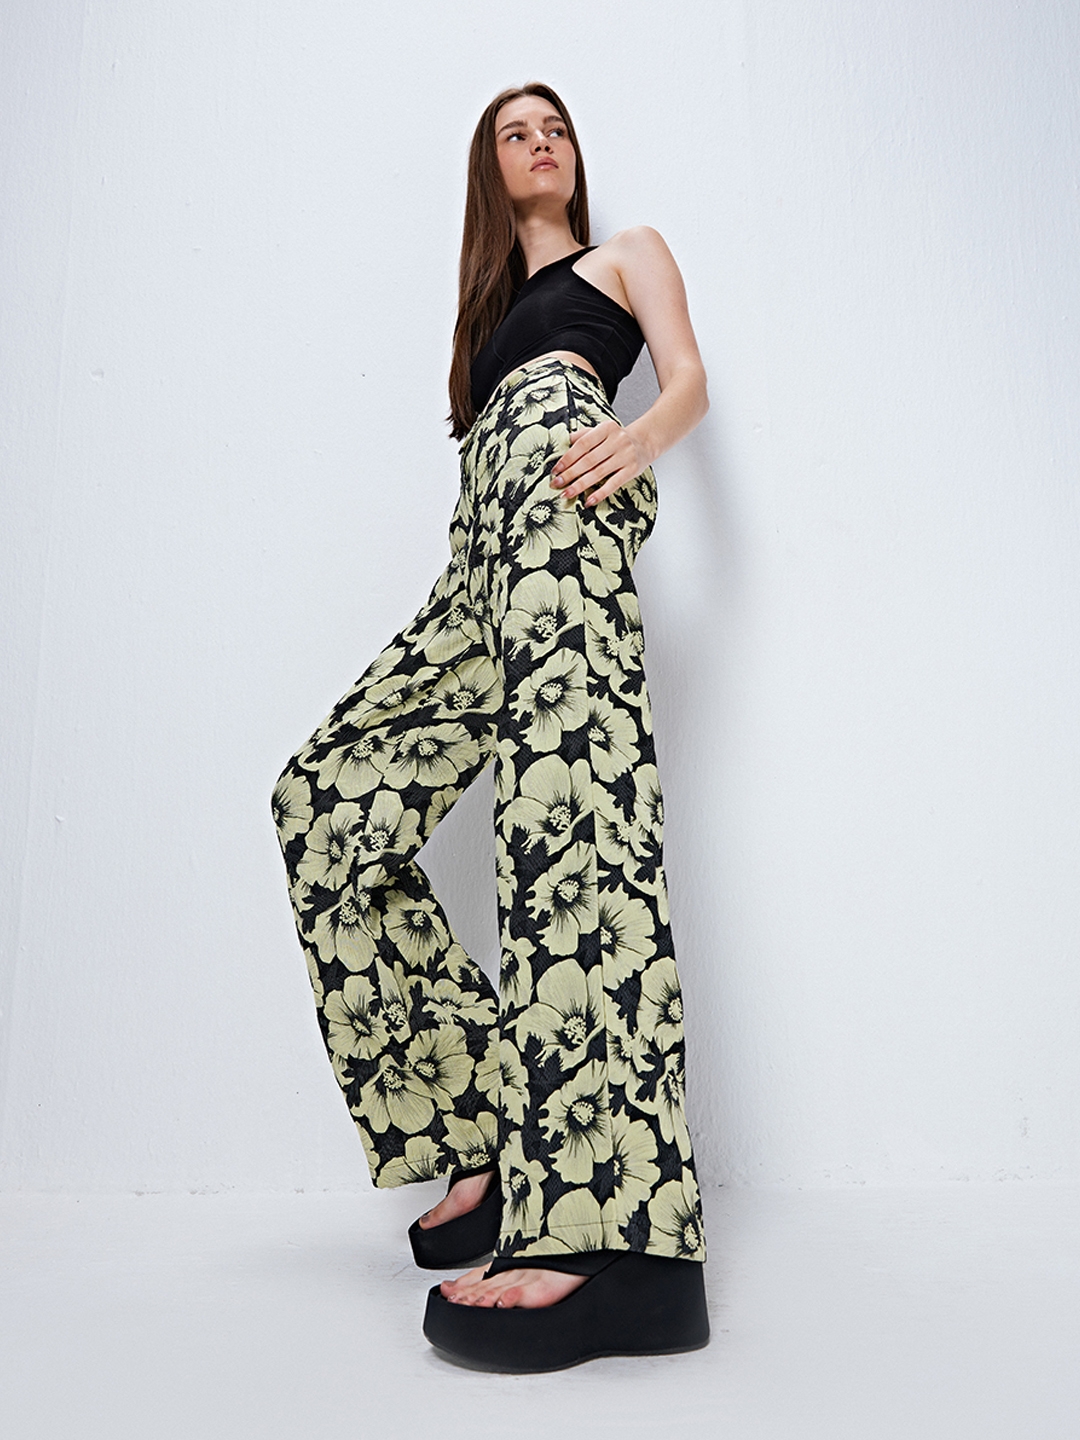 Elizabethan Collar Blouse, Floral Tuxedo Pants | Style by Silvia